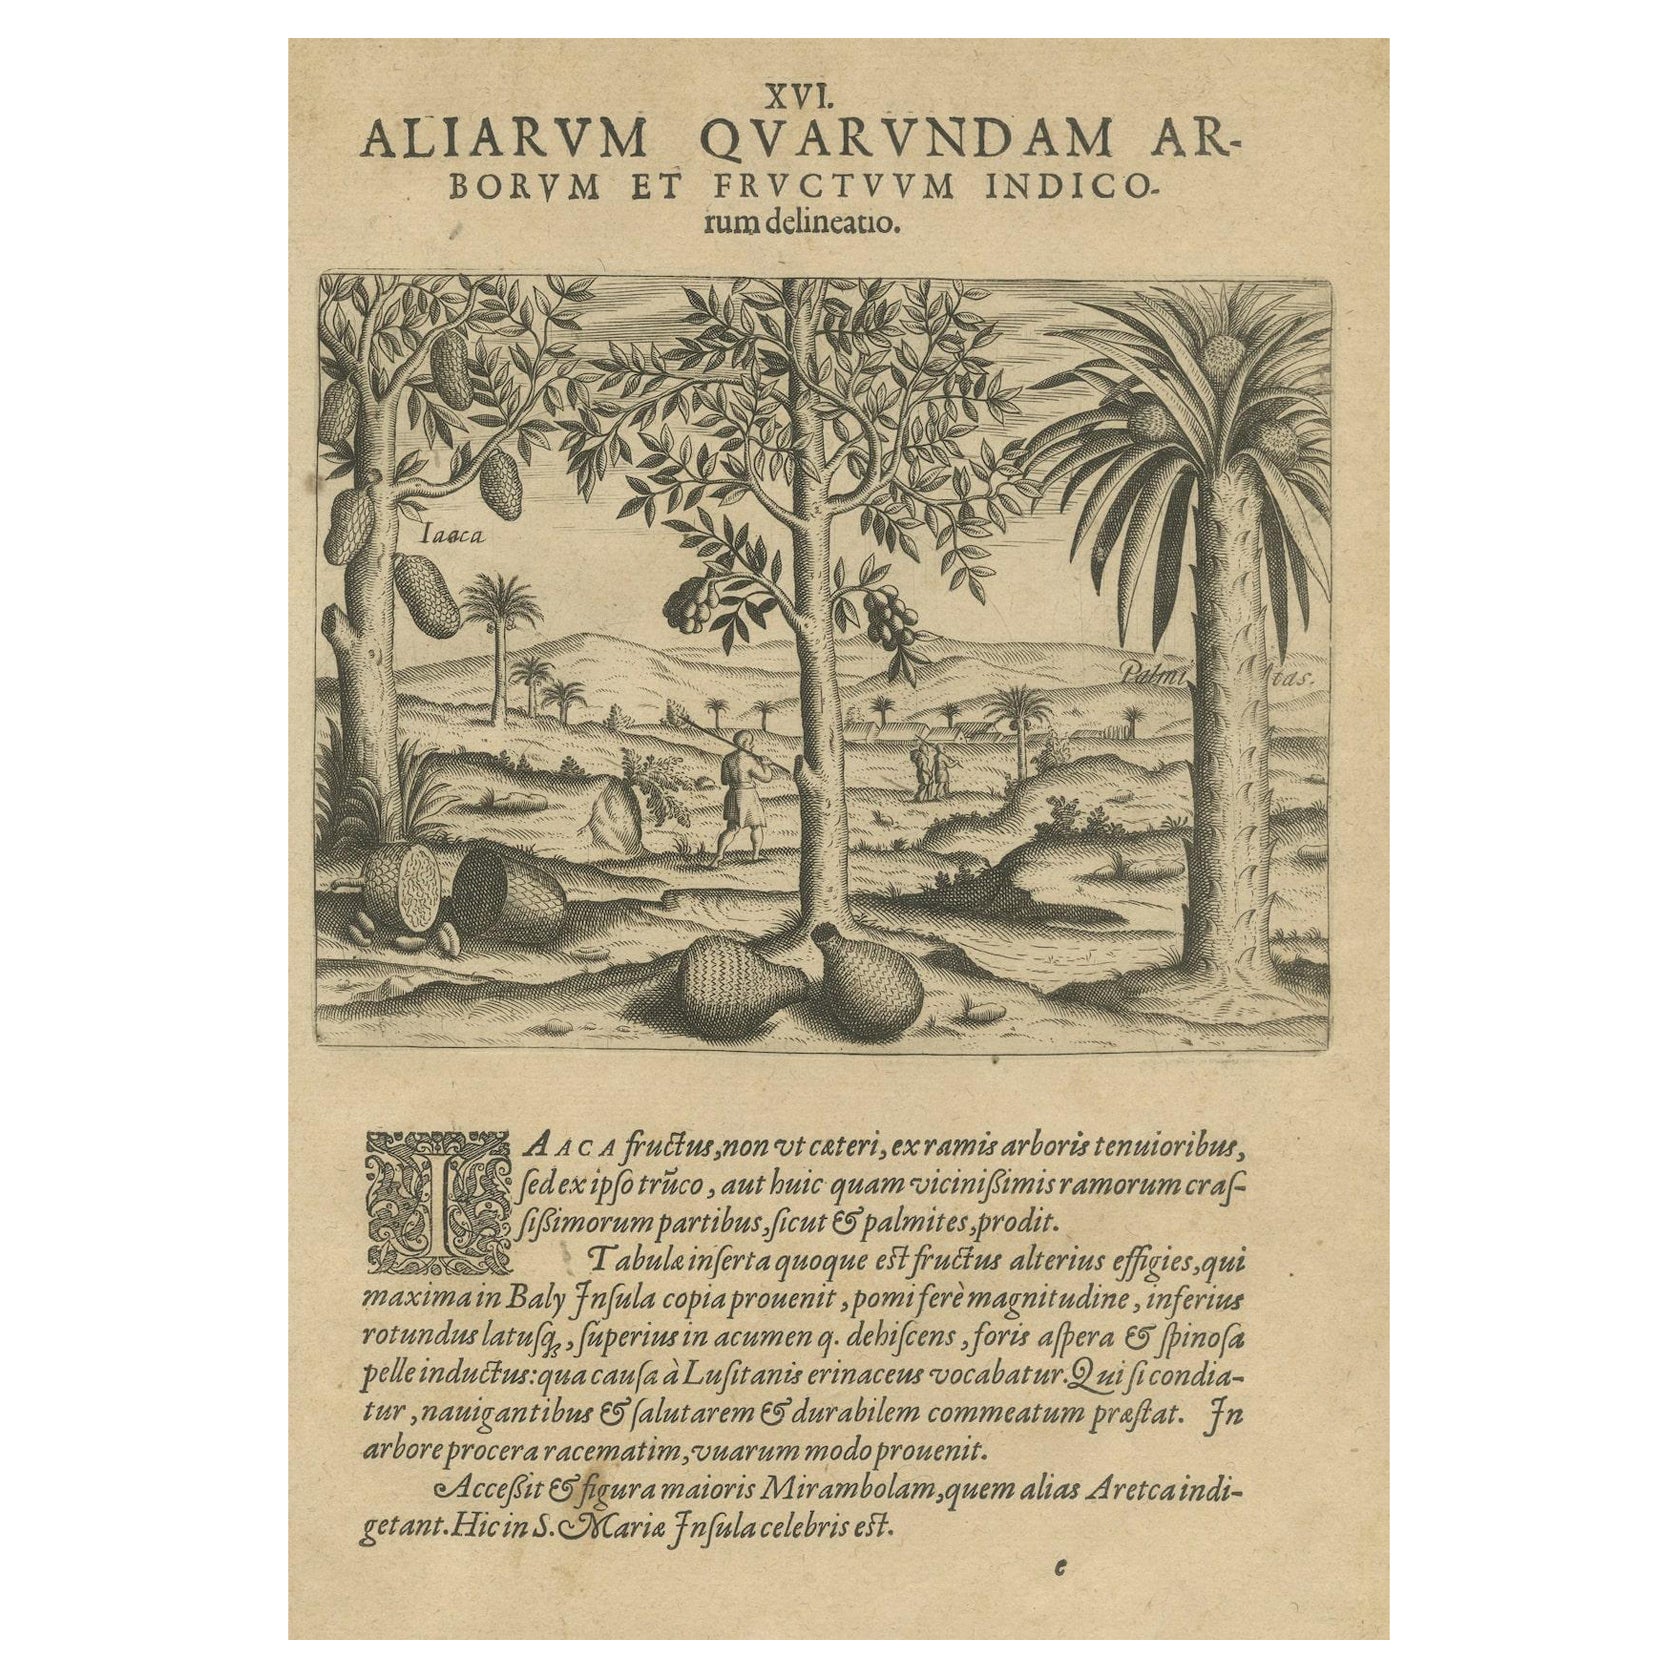 Tropical Abundance: The Jackfruit and Palm Trees in De Bry's 1601 Engraving